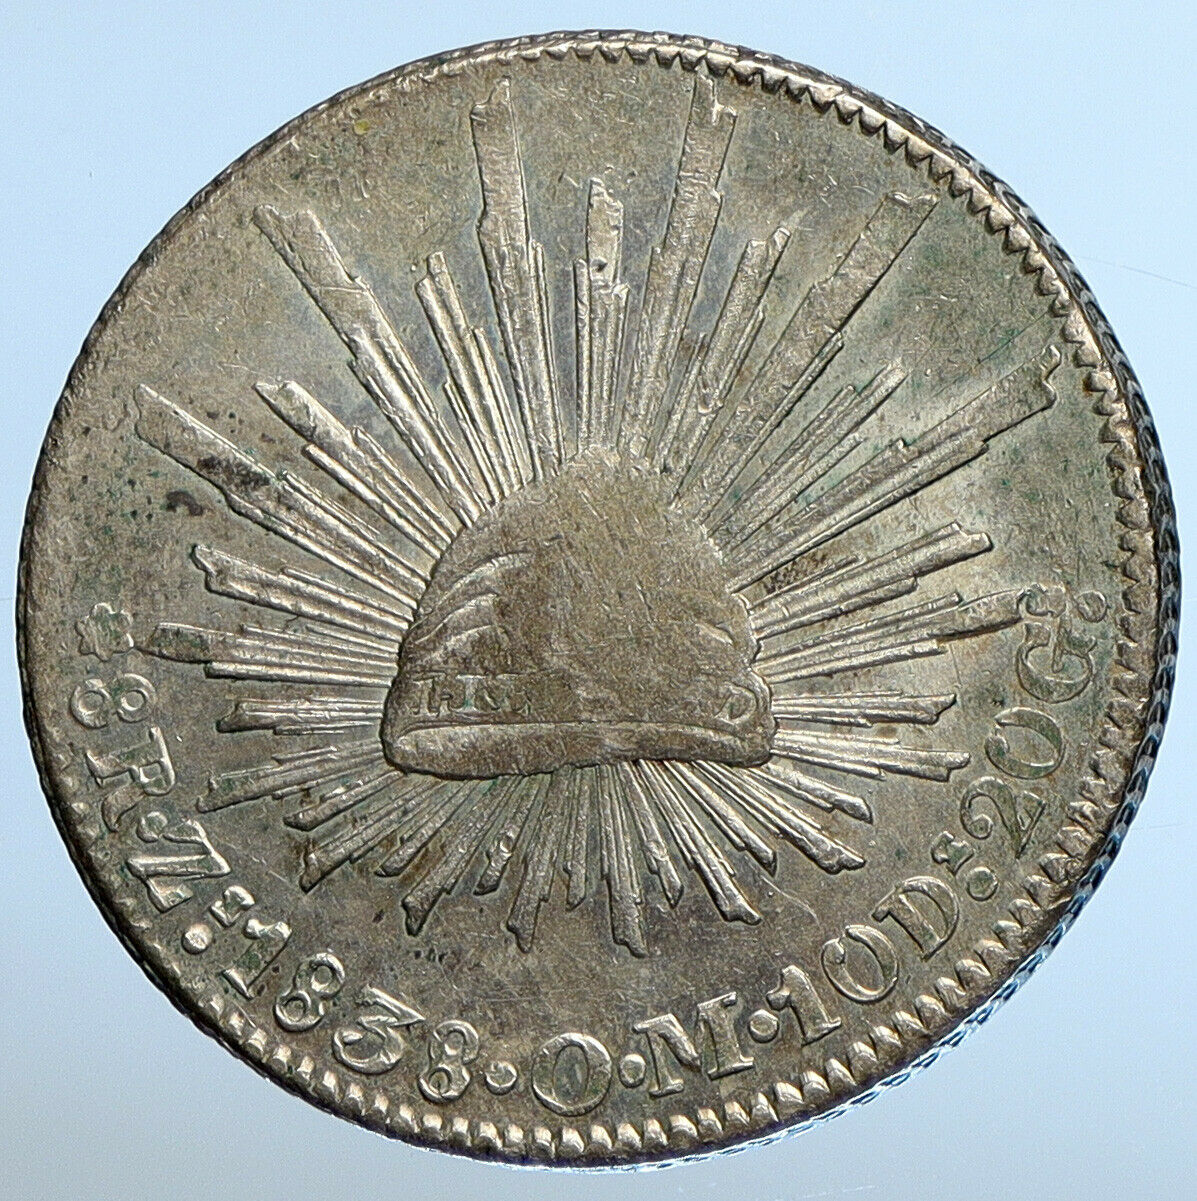 1838 Zs OM MEXICO Large Eagle Sun Antique Mexican Silver 8 Reales Coin i111284